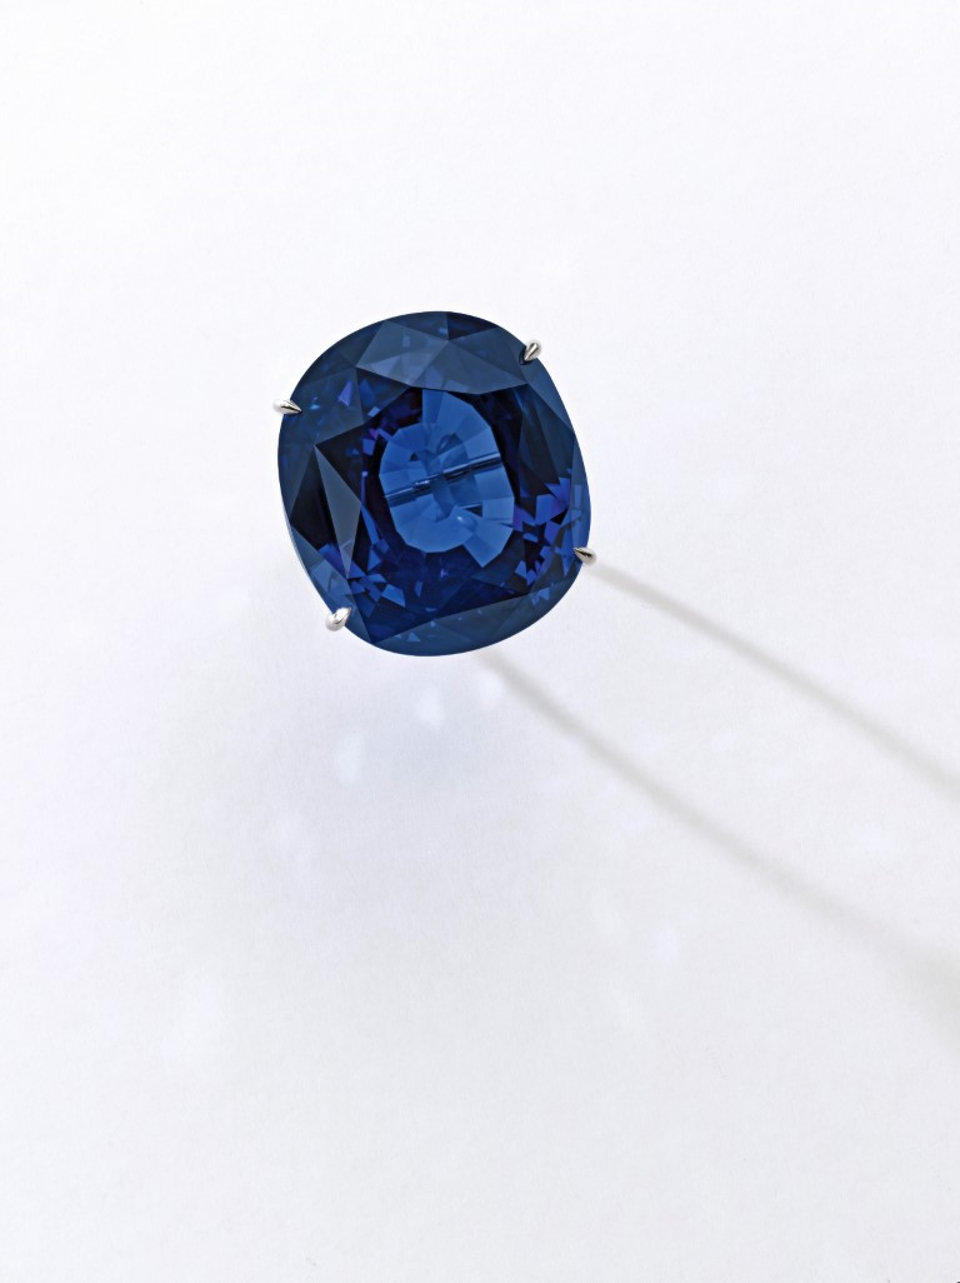 105-Carat Sapphire Sells for $1.8 million at Sotheby's Geneva Jewelry  Auction - The Natural Sapphire Company Blog